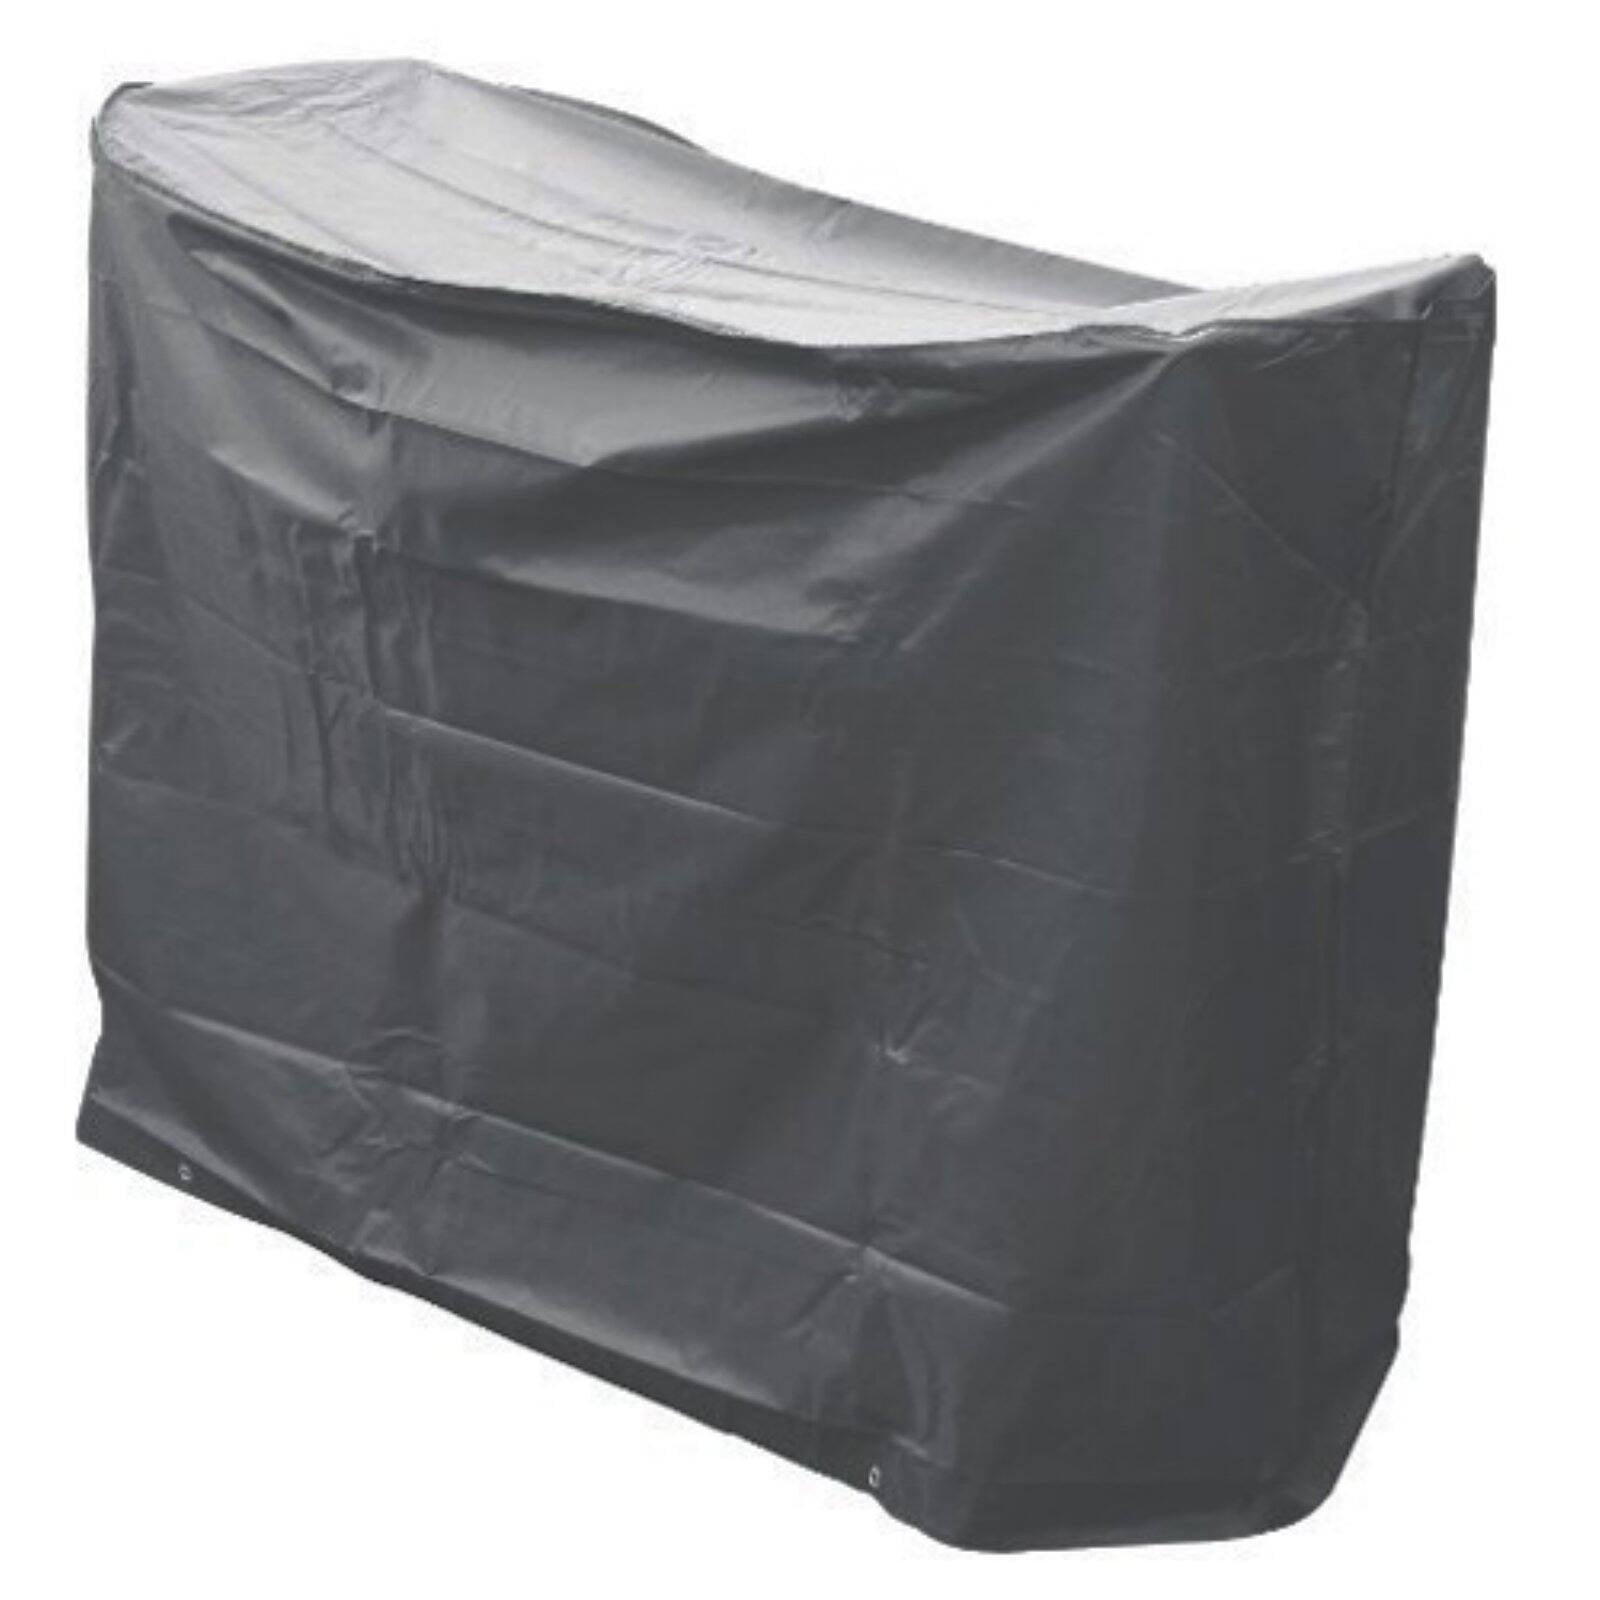 Keeping Furniture and BBQ Covers Secure Bosmere Bosmere 5 Bungee Ties 